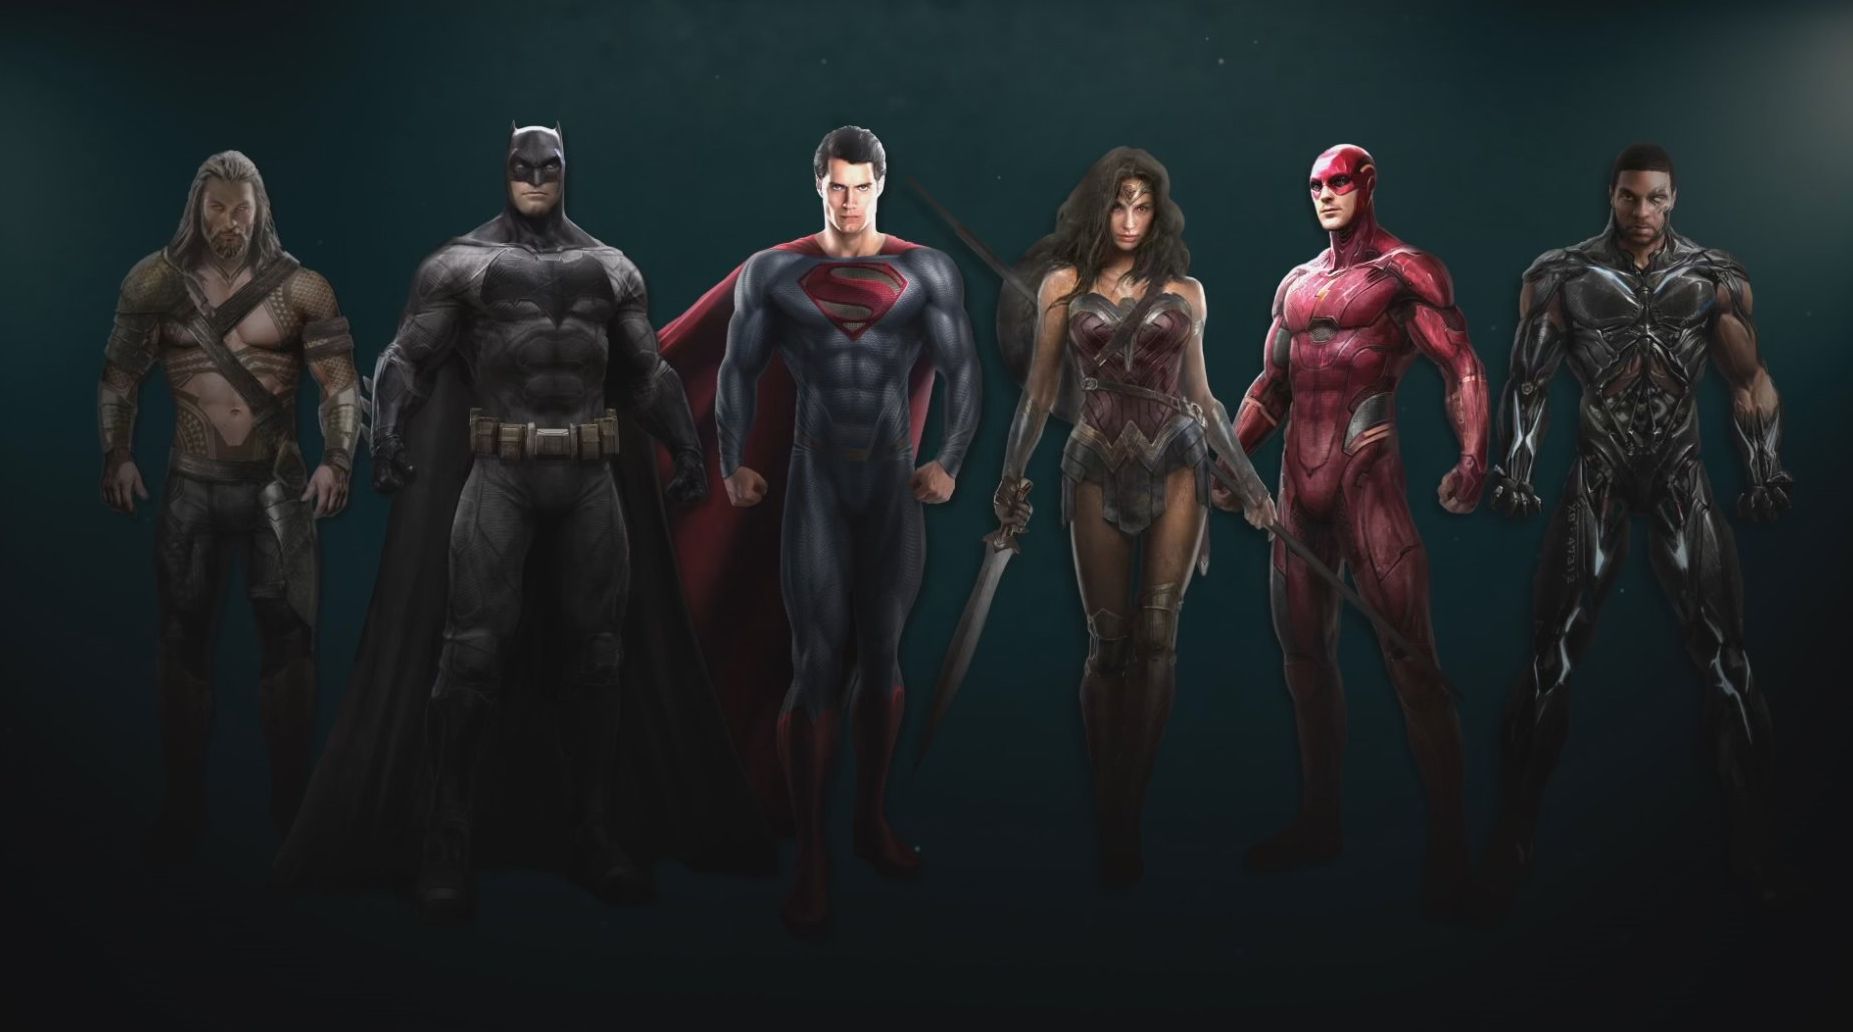 New concept art reveals full-body look at the full roster of